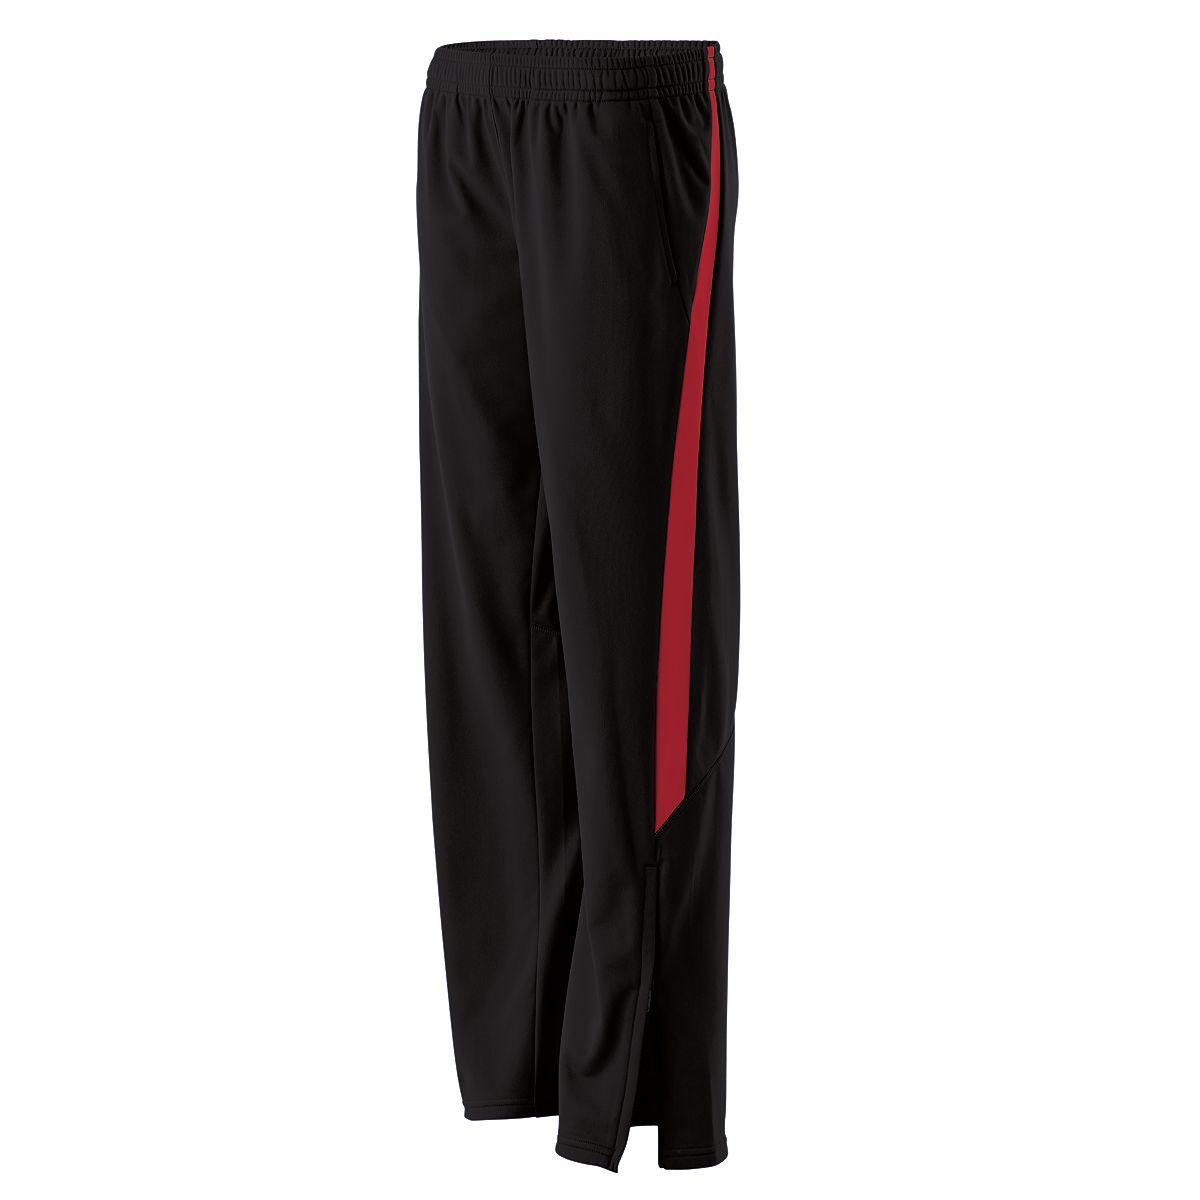 Holloway Ladies Determination Pant in Black/Scarlet  -Part of the Ladies, Ladies-Pants, Pants, Holloway product lines at KanaleyCreations.com